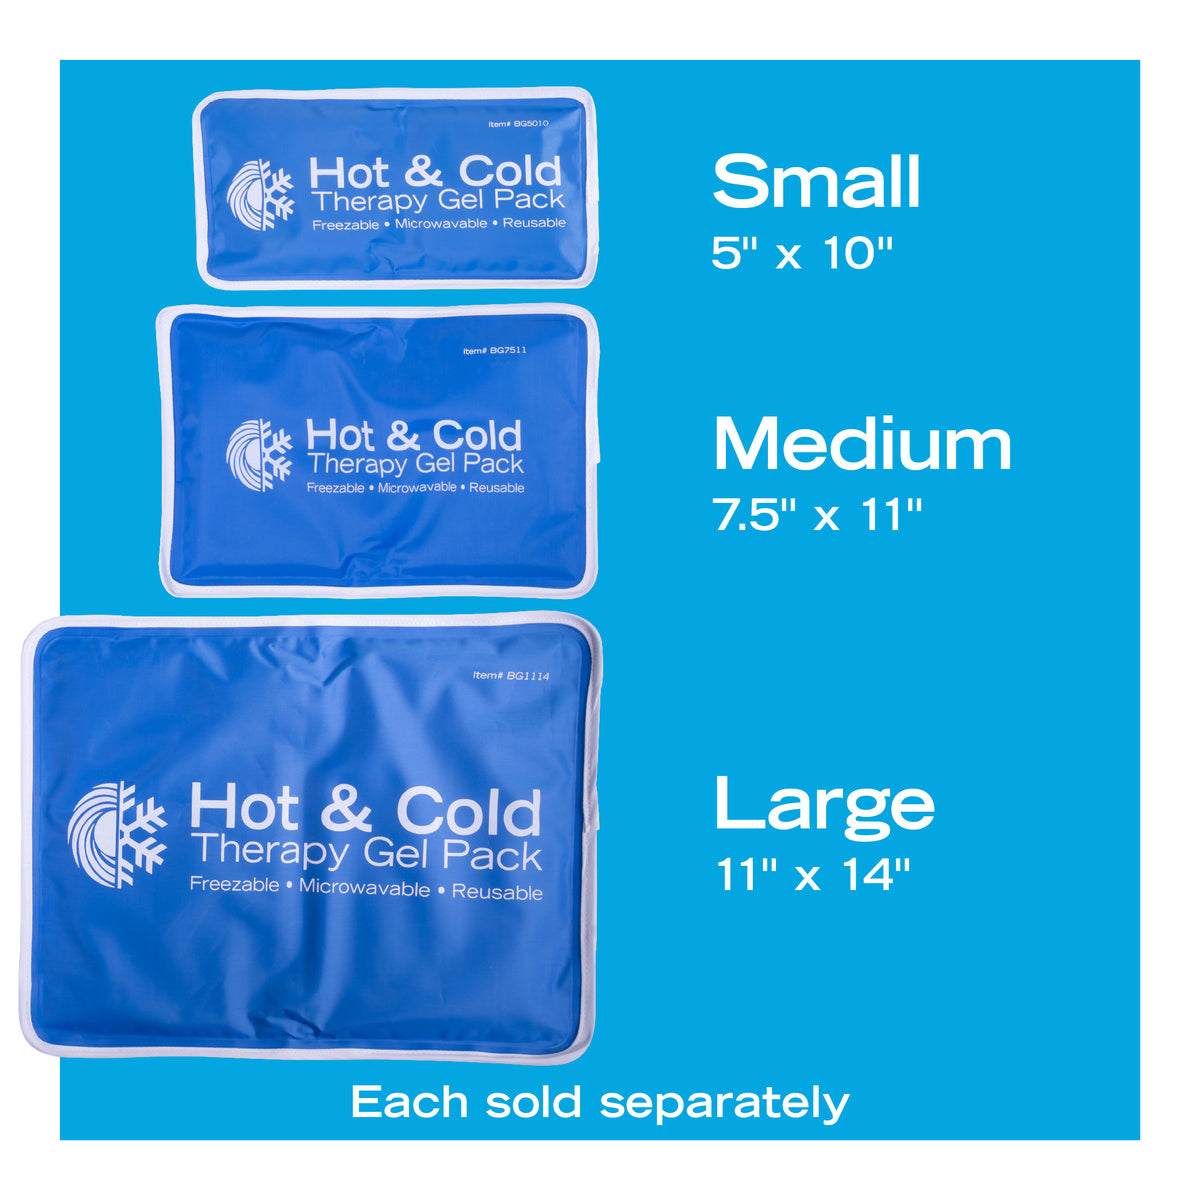 The Roscoe Reusable Hot/Cold Gel Pack in three sizes: small (5” x 10”), medium (7.5” x 11”), and large (11” x 14”) 